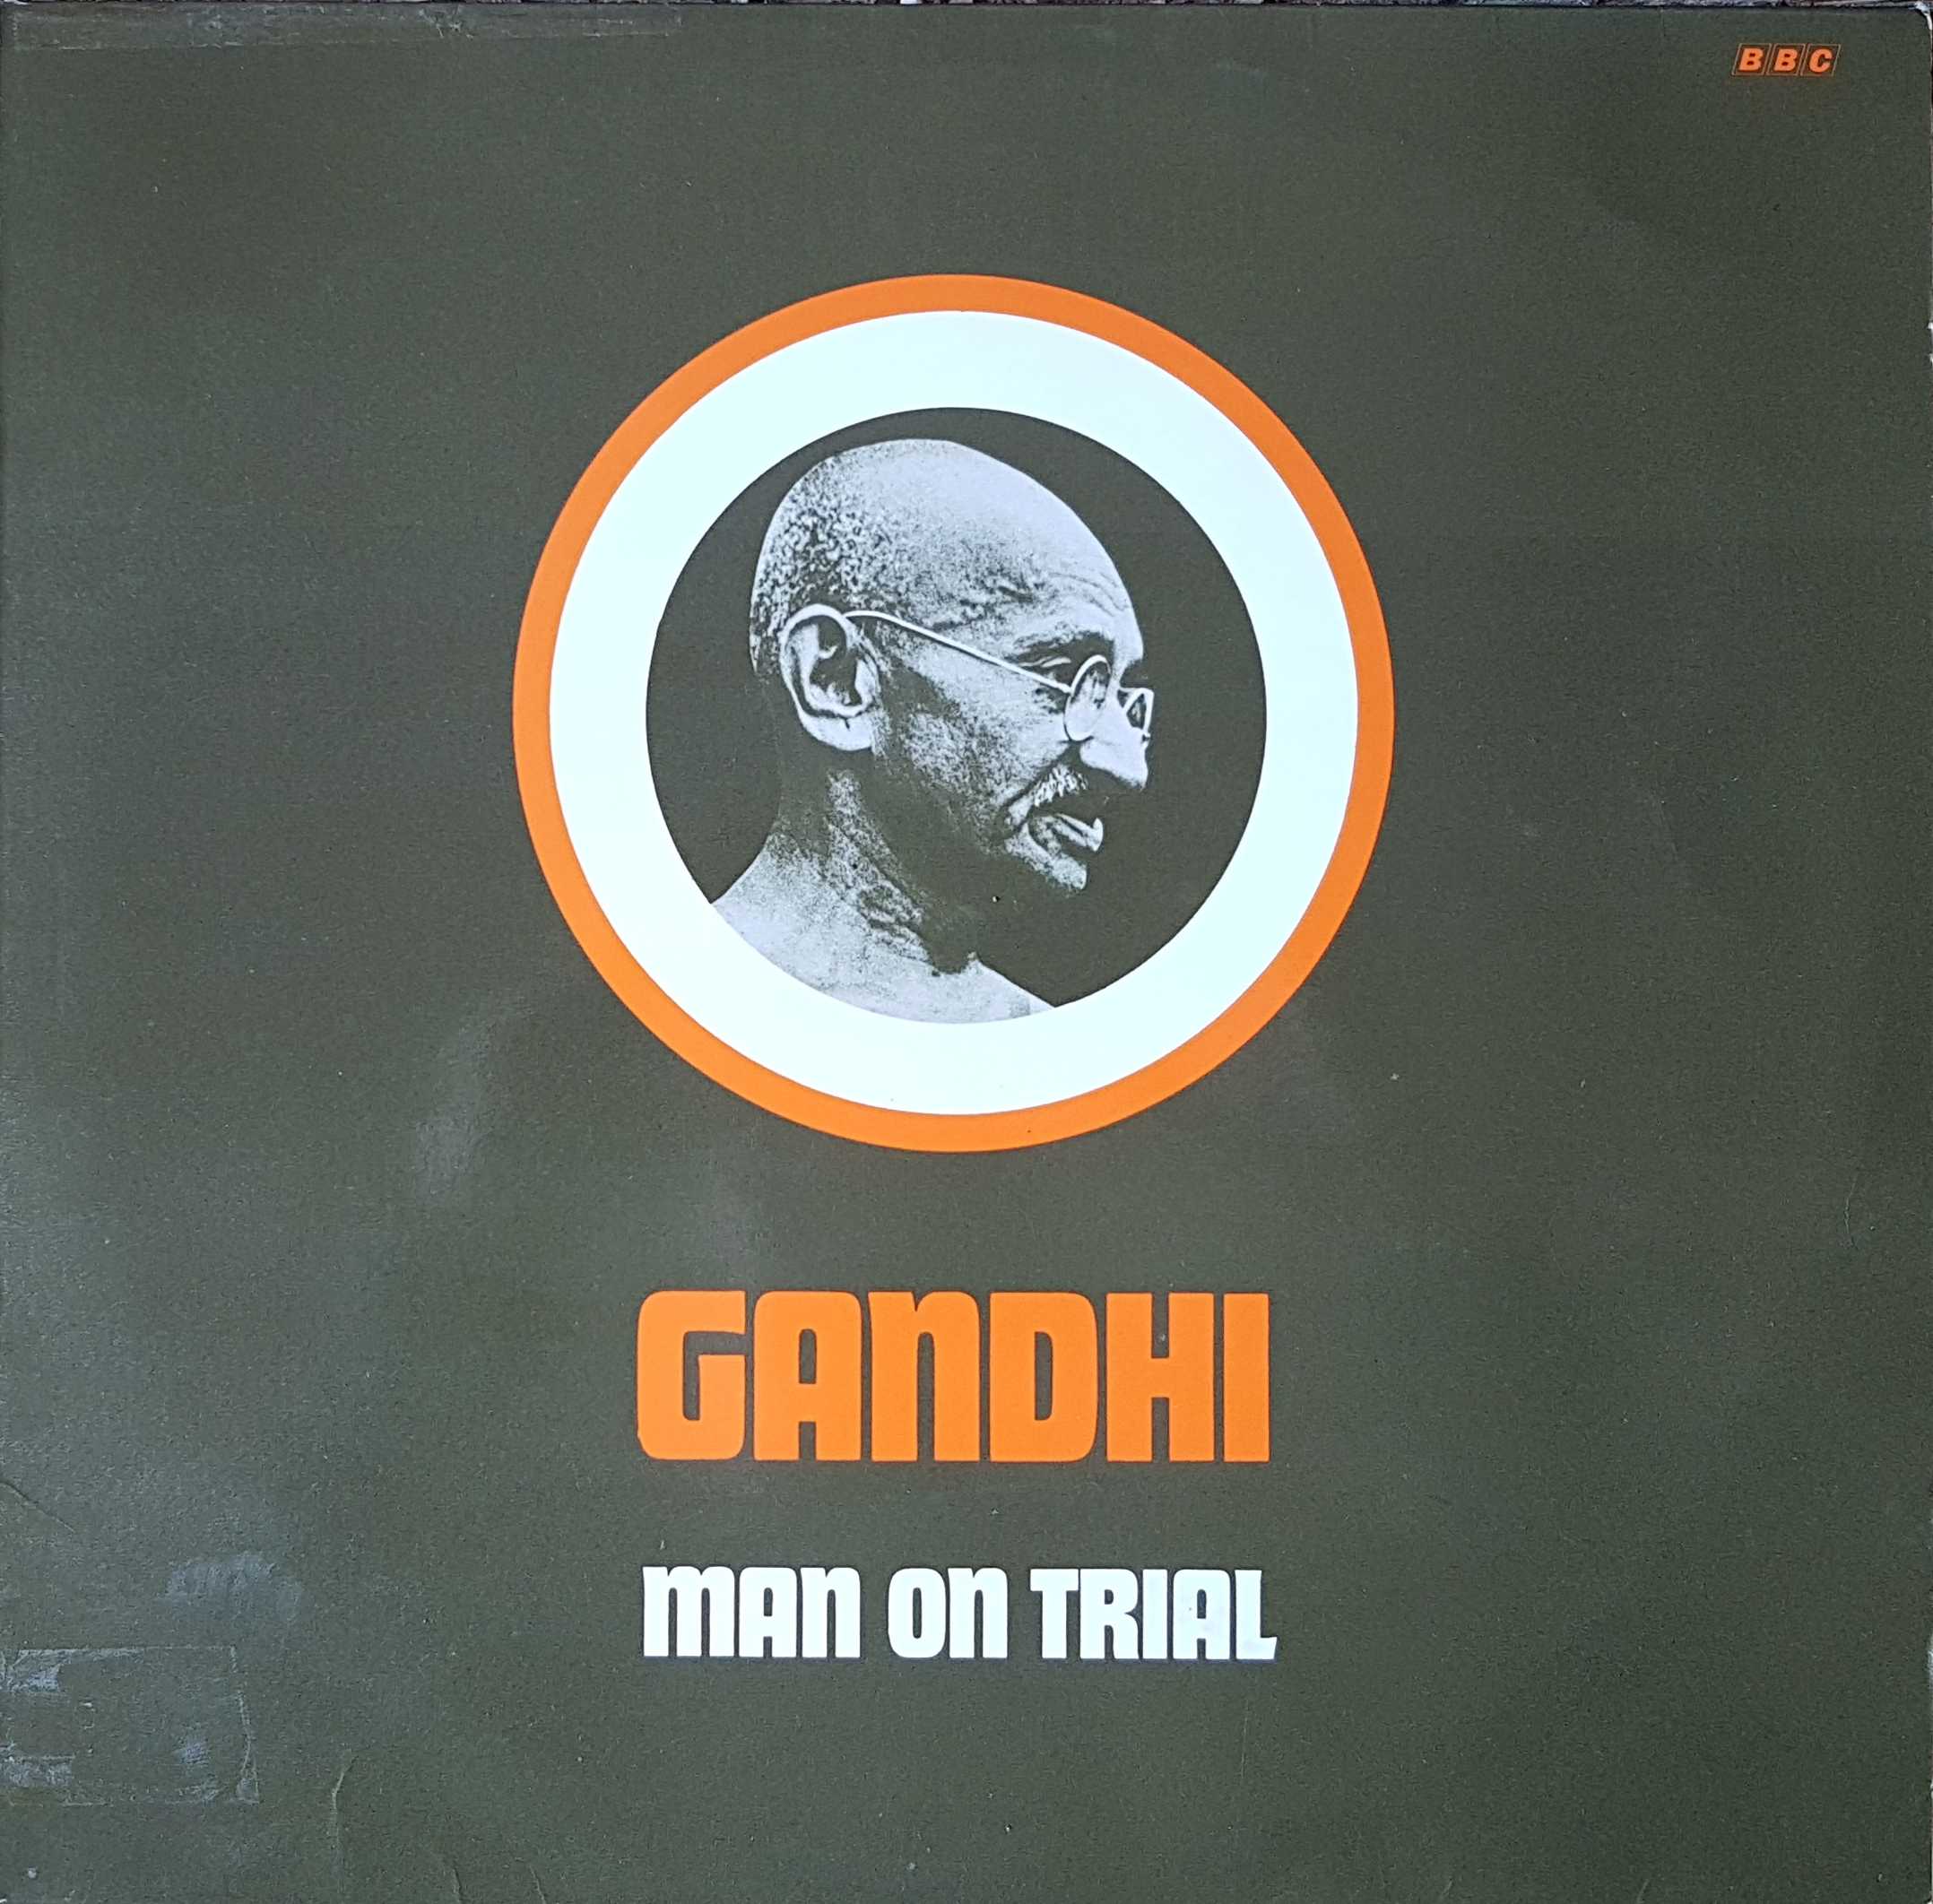 Picture of Gandhi - Man on trial by artist Francis Watson from the BBC albums - Records and Tapes library